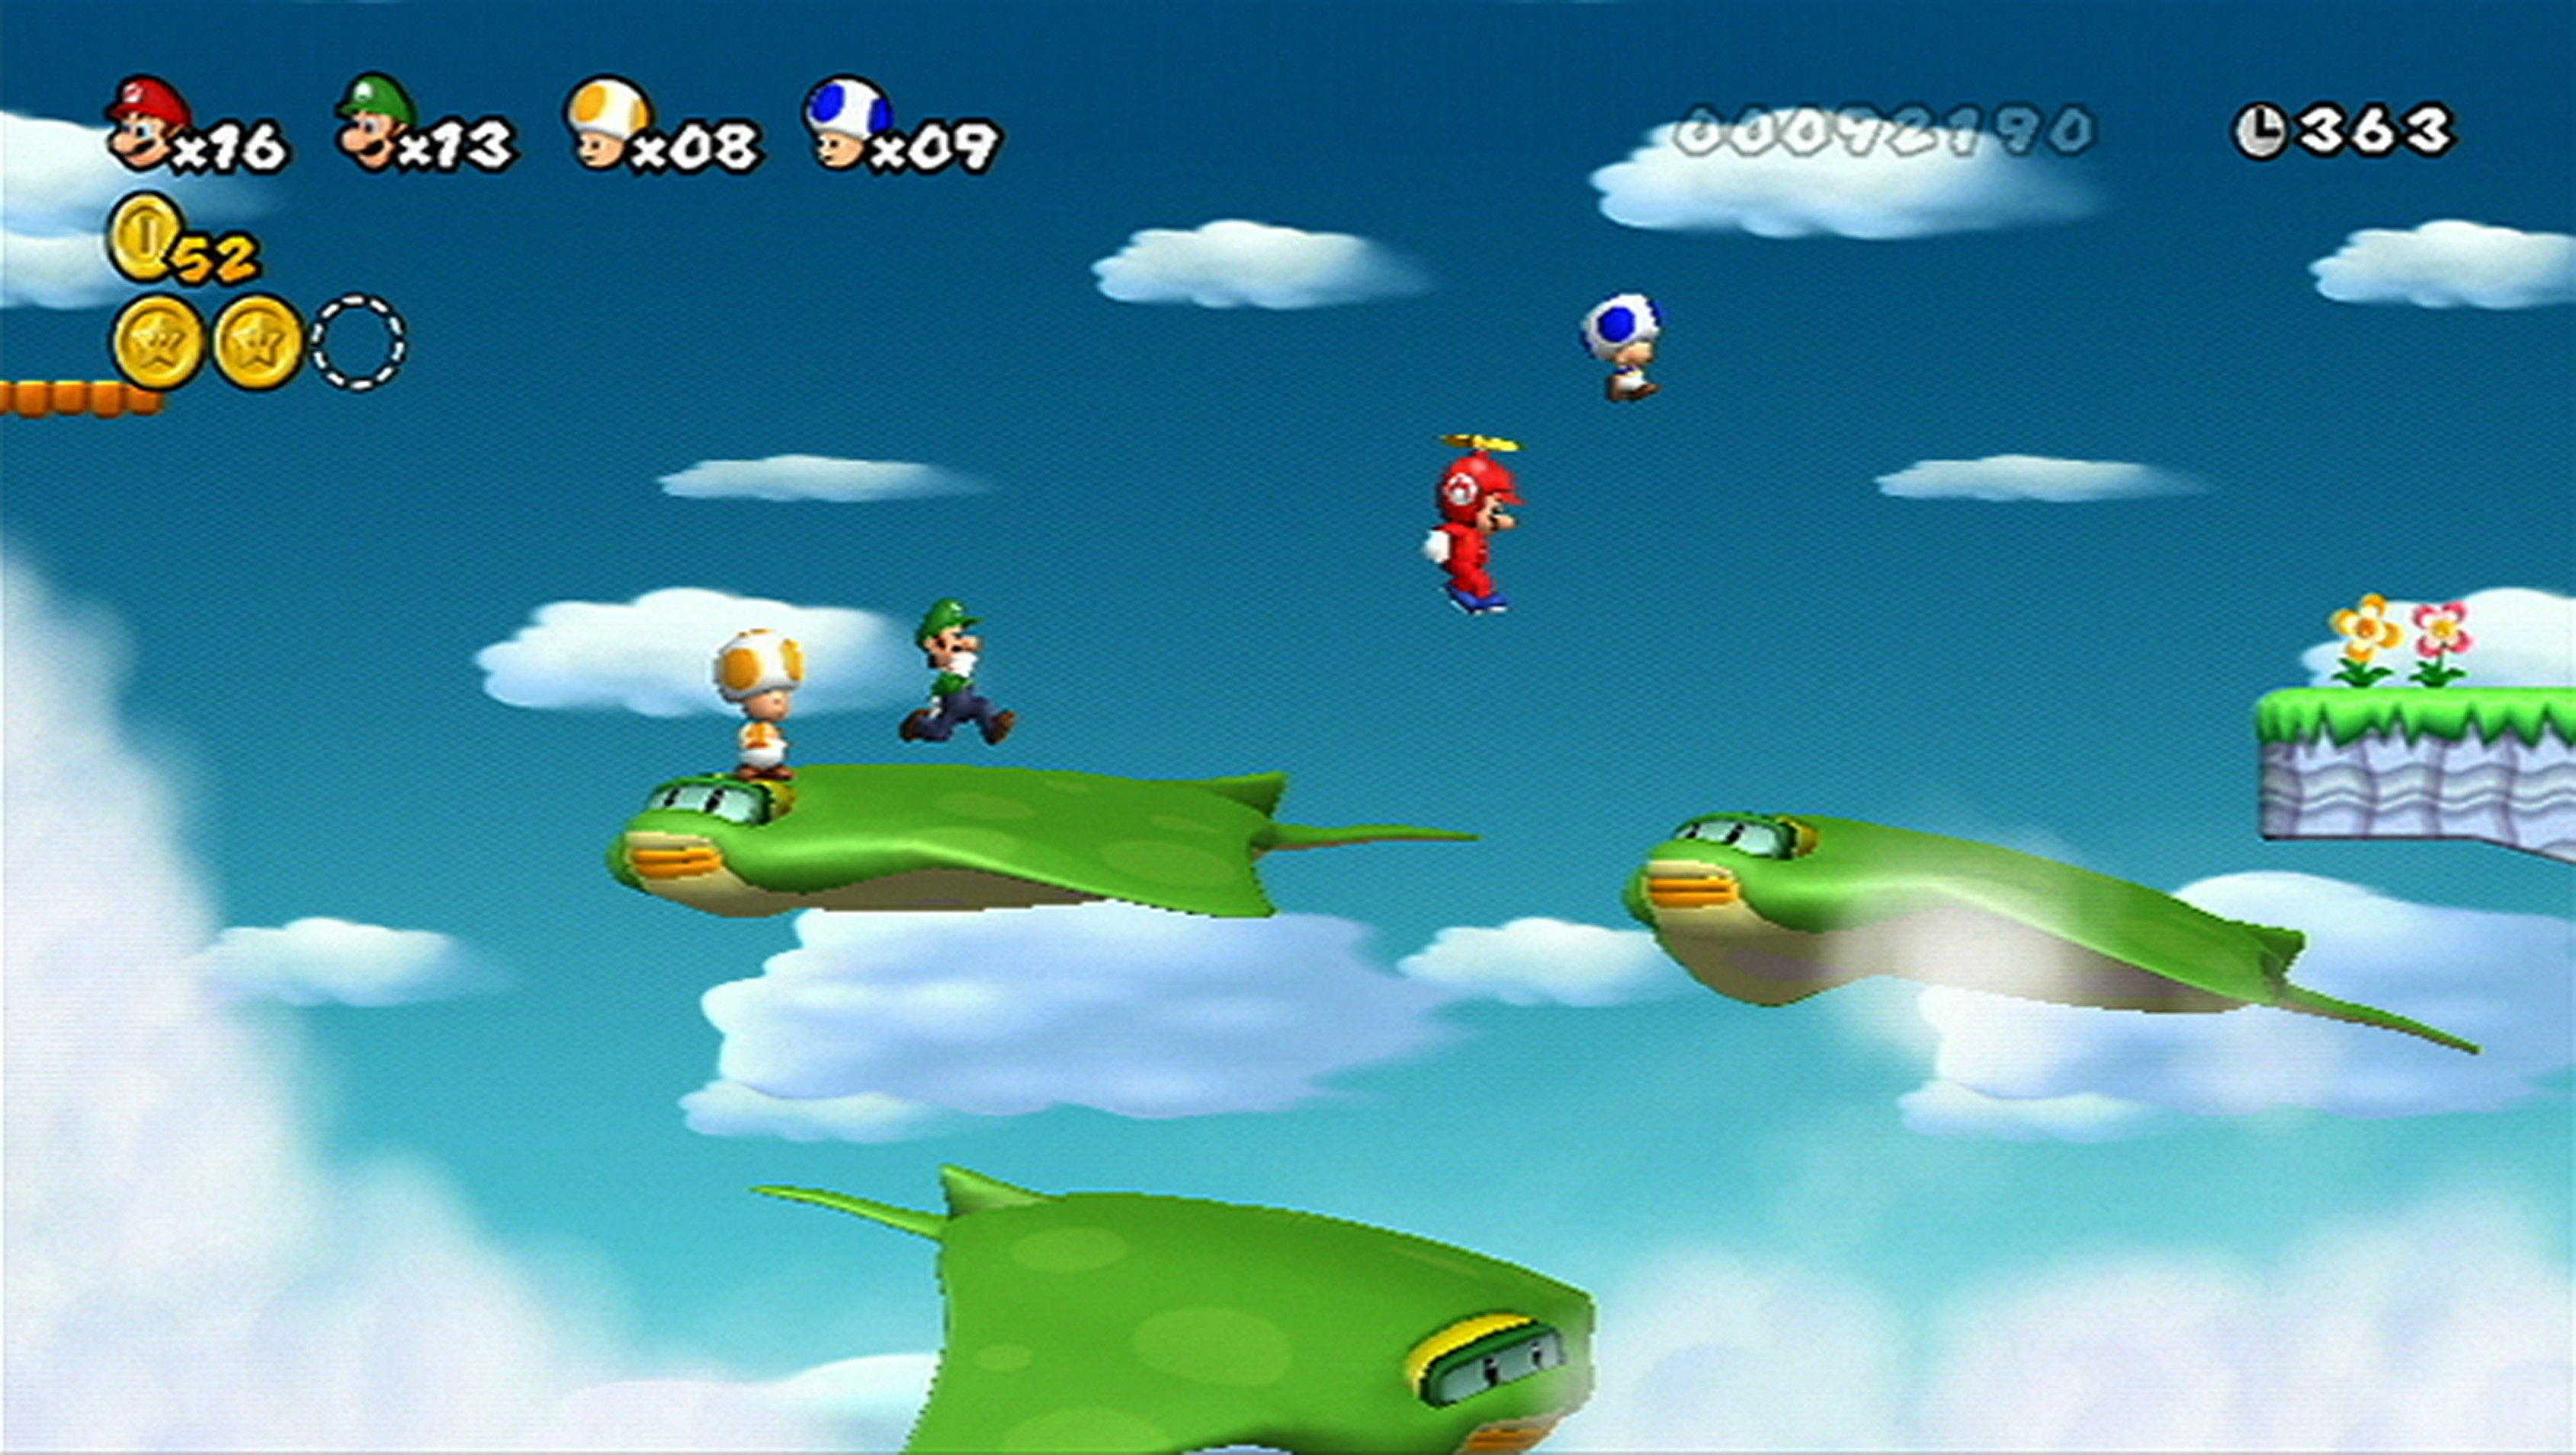 NEW SUPER MARIO BROS free online game on